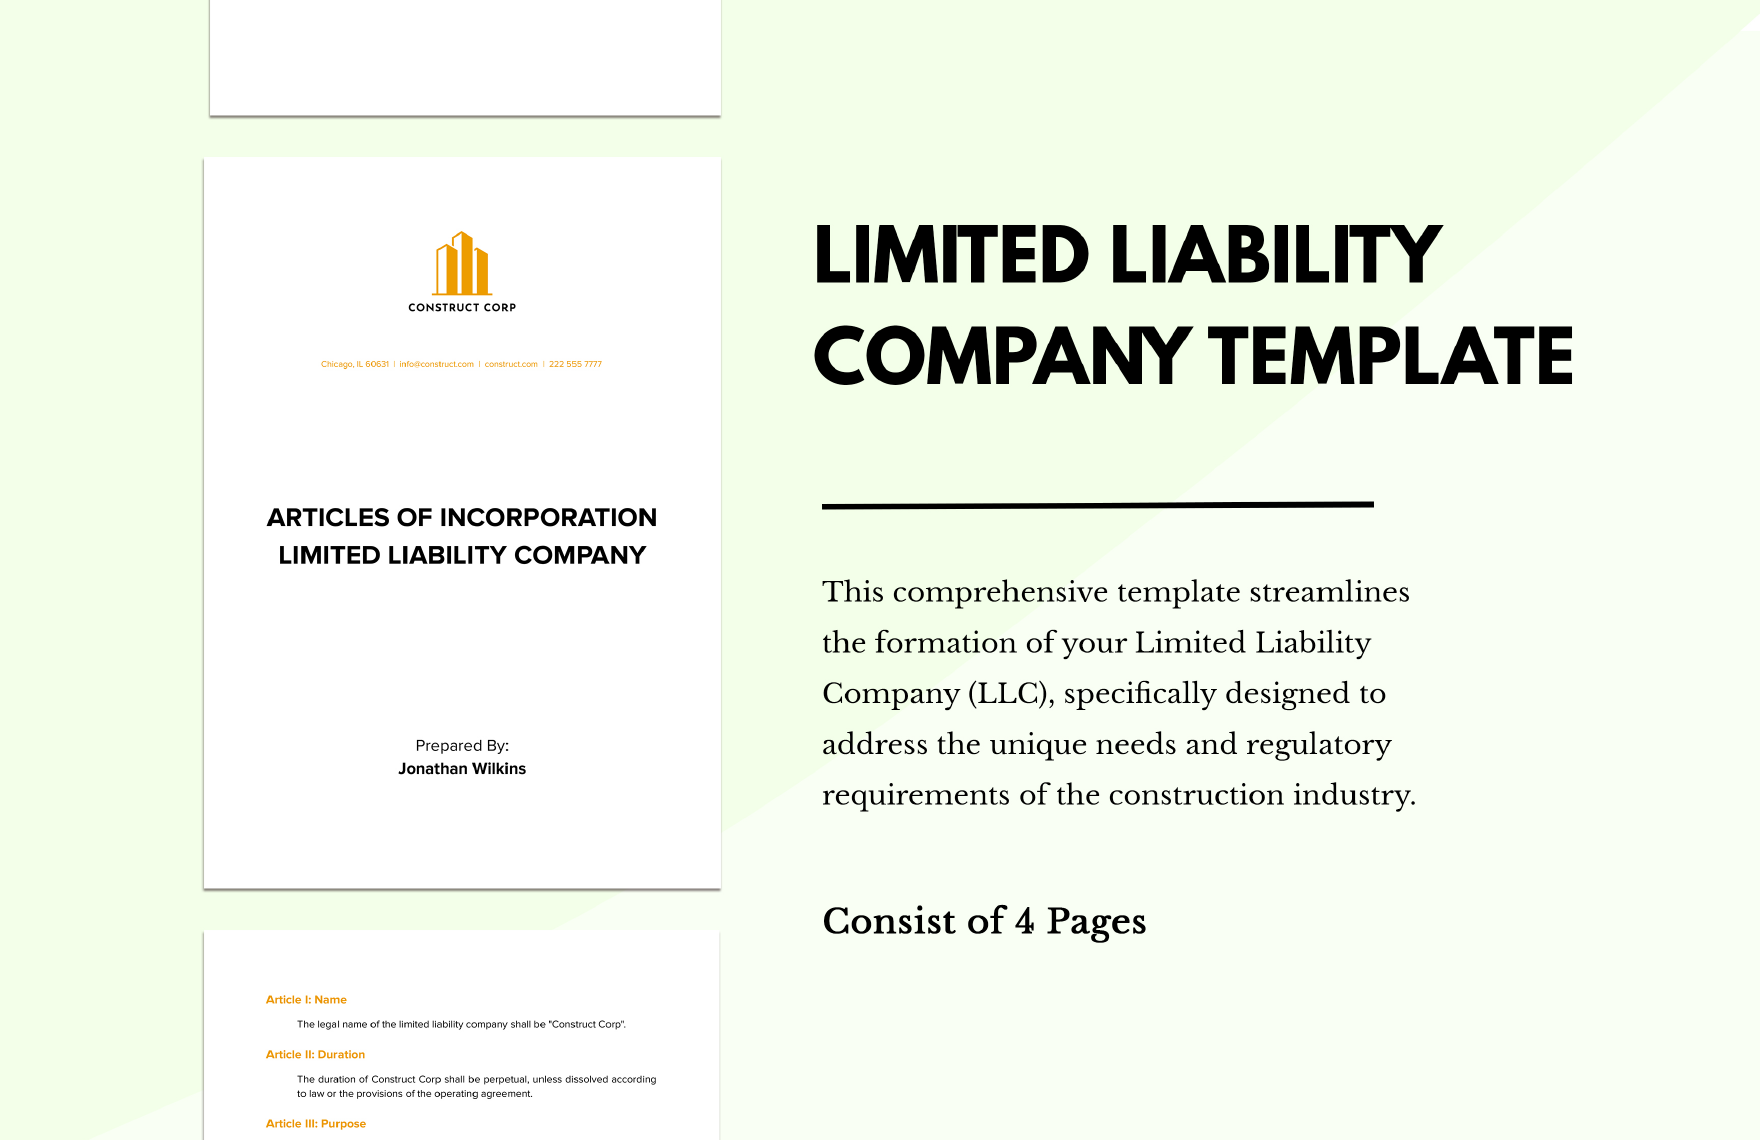 Limited Liability Company Template